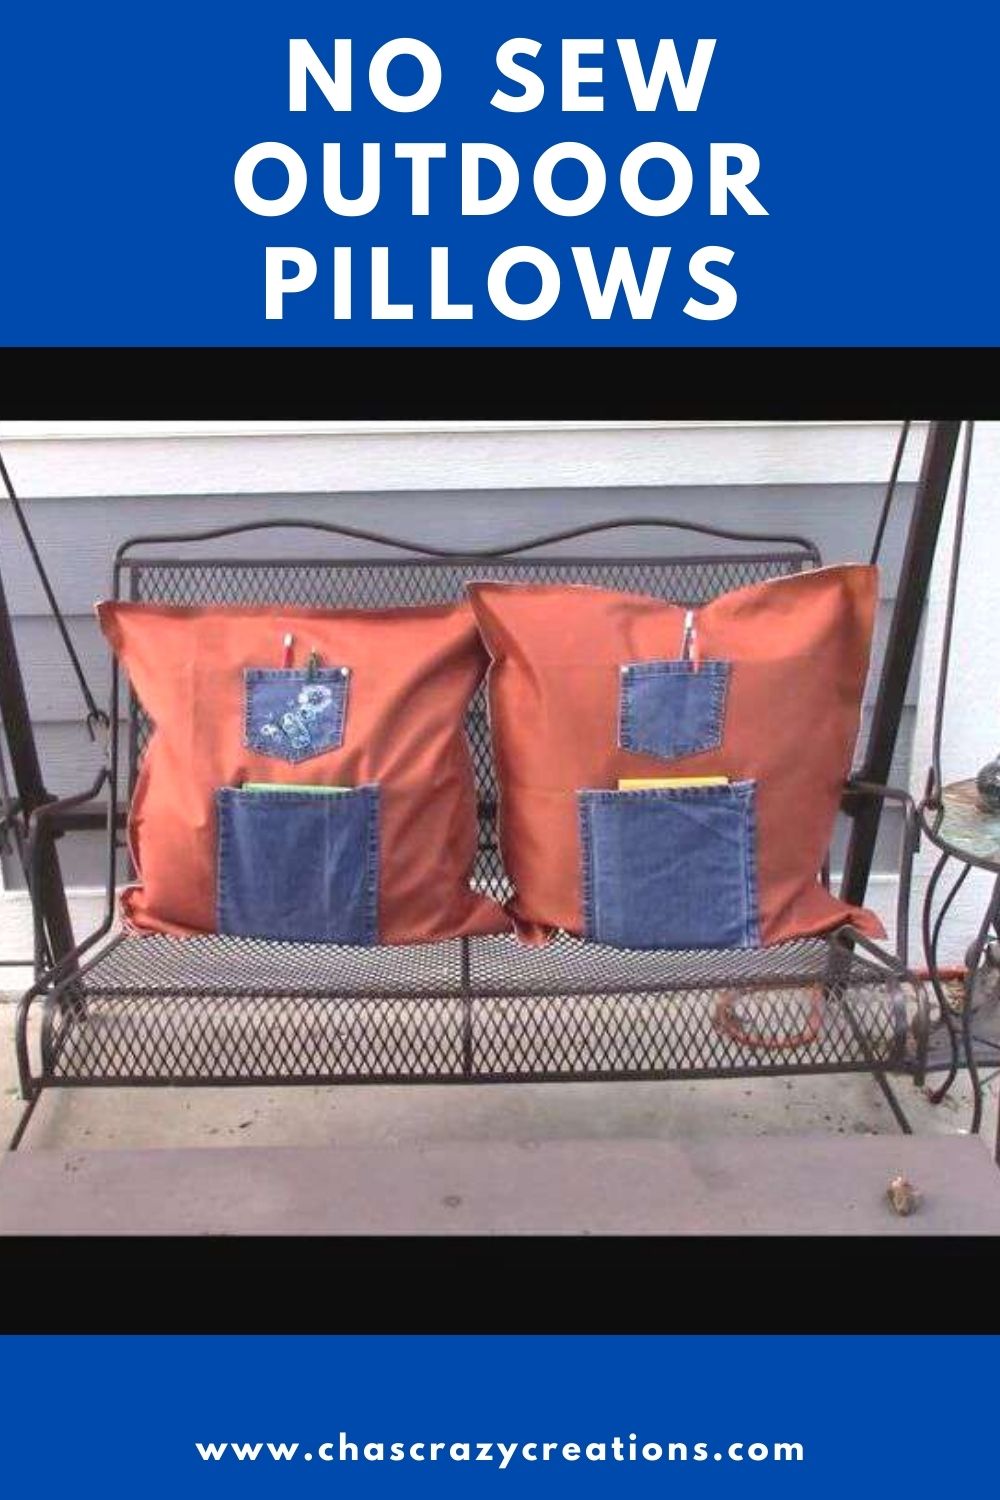 no sew outdoor pillows on patio bench pin image with text overlay